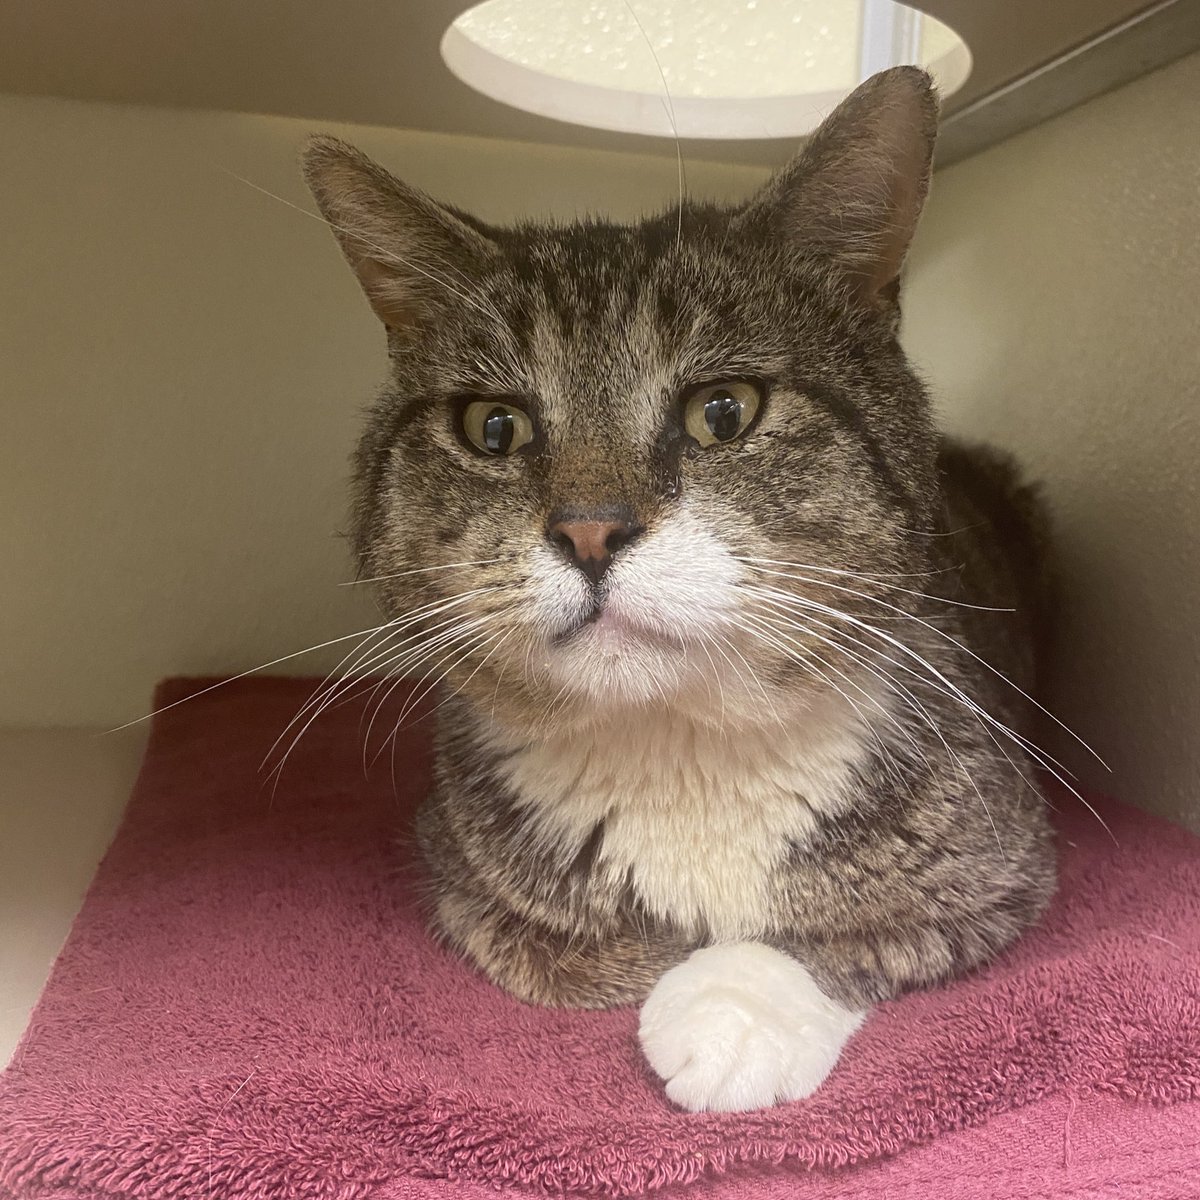 Meet Blimp, our chubby-cheeked boy. He’s a little shy at the moment and would love a home where he can relax and decompress. He’s six years old and located in Blackwood, NJ. 

#catlover #sheltercat #adoptacat #tabby